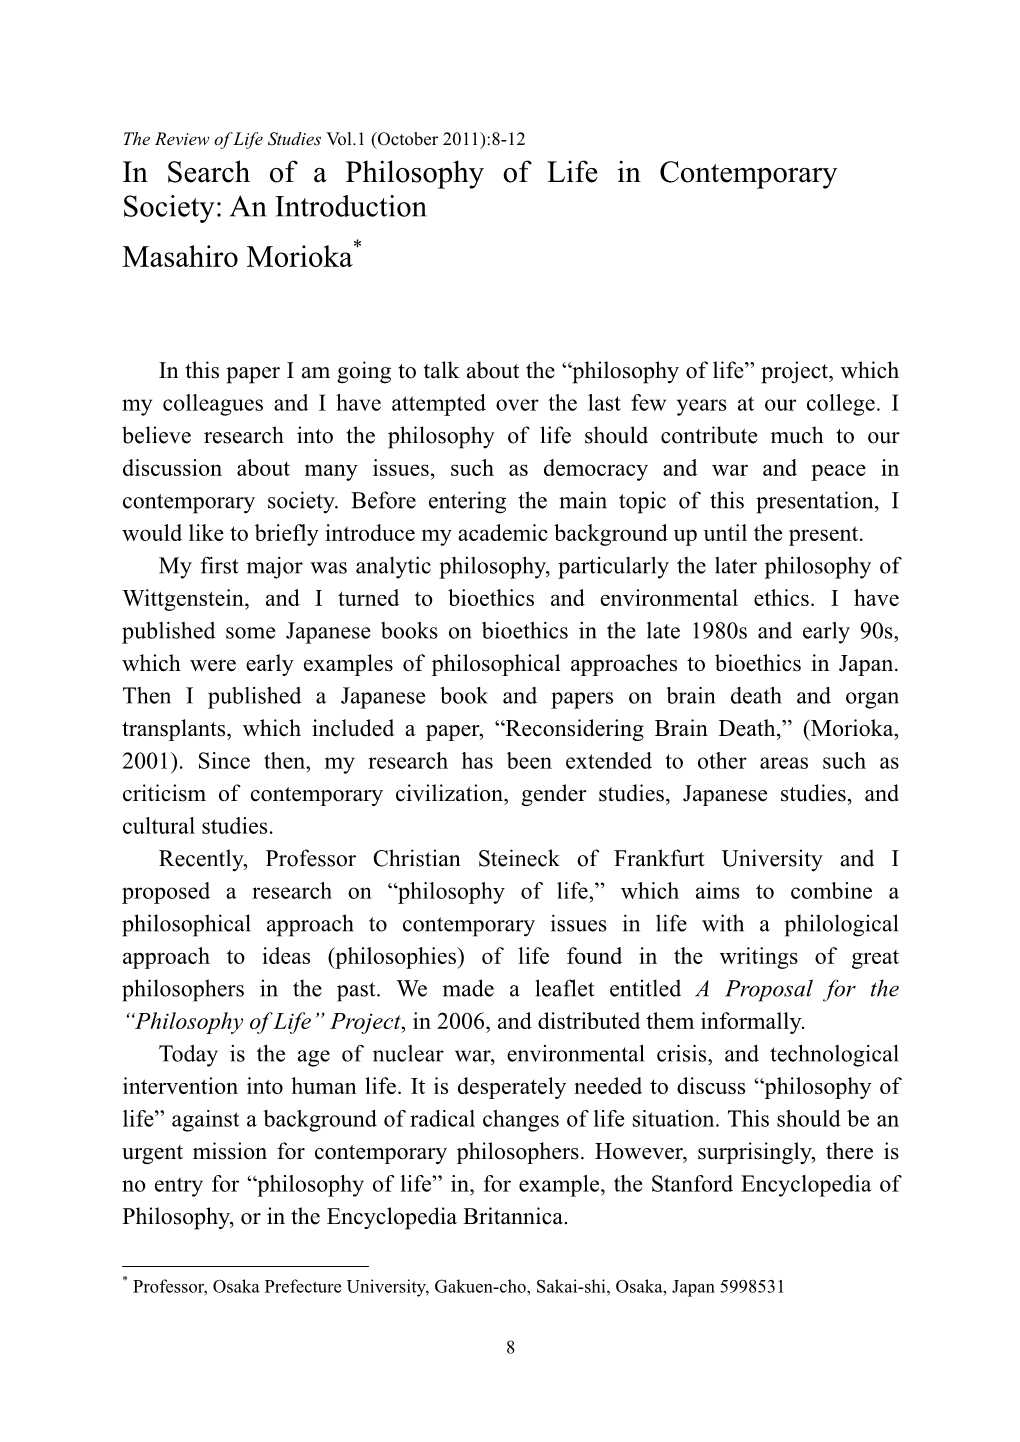 In Search of a Philosophy of Life in Contemporary Society: an Introduction Masahiro Morioka*